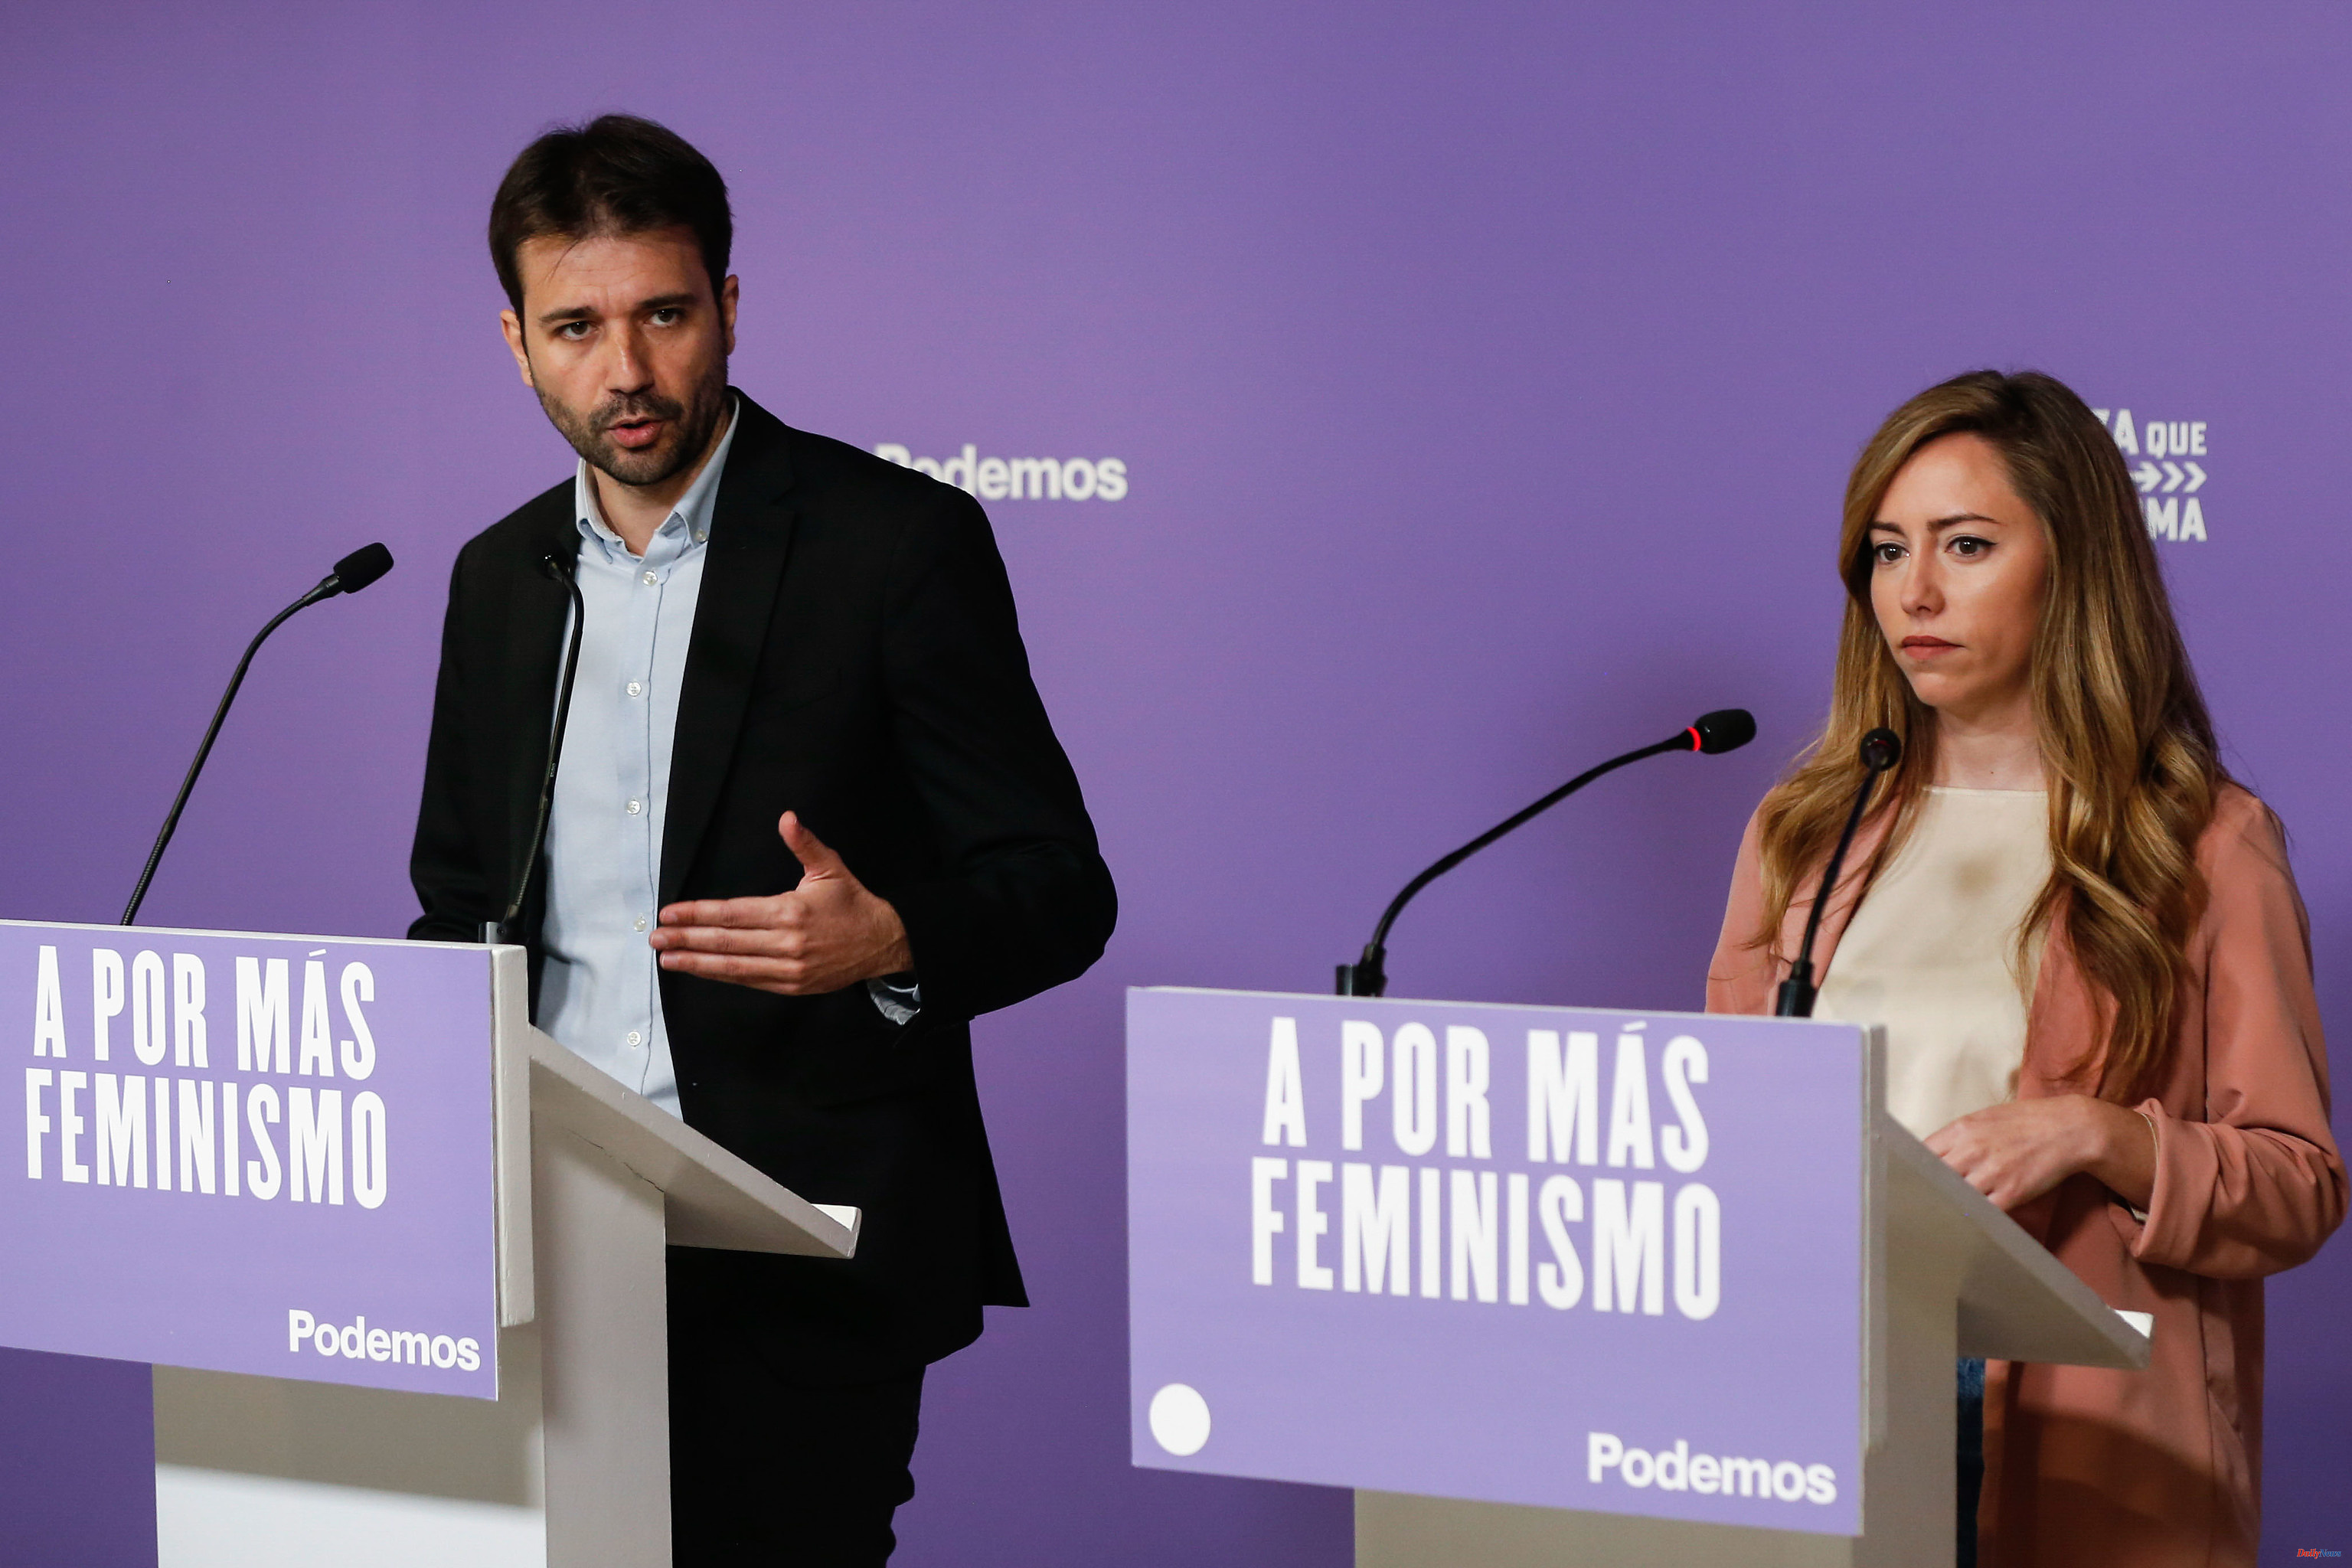 Politics Podemos threatens not to attend the presentation of the candidacy of Yolanda Díaz if they do not reach an agreement beforehand